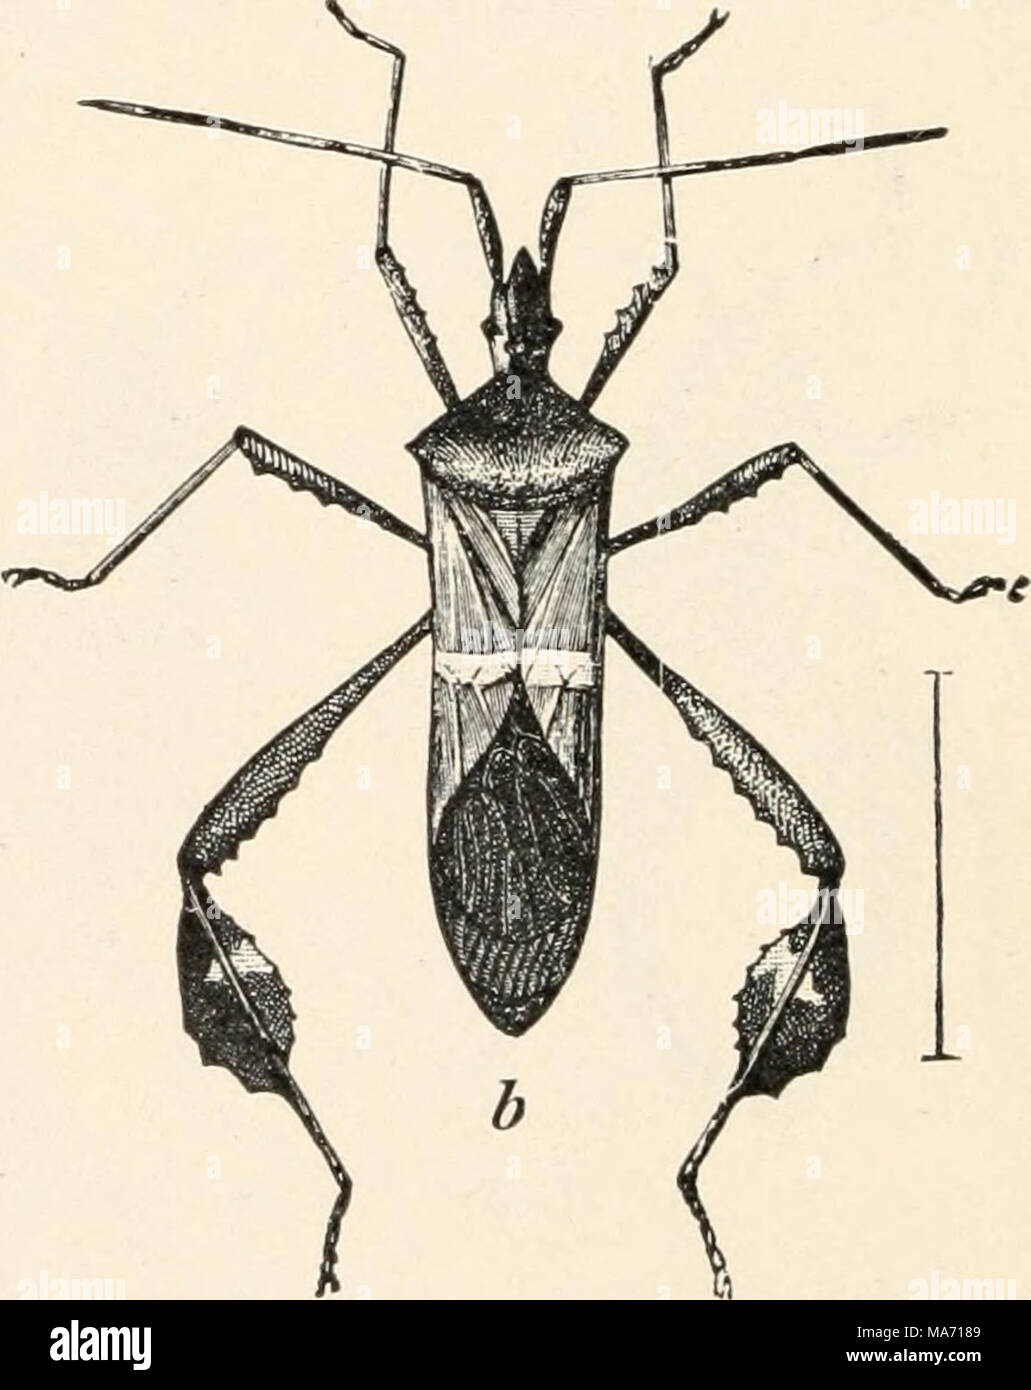 . Elementary entomology . FIG. 163. a, the northern leaf-footed plant-bug (Leptoglossus oppositits}-, b, the banded leaf-footed plant-bug (Leptoglossus phyllopus). (Twice natural size) (After Chittenden, United States Department of Agriculture) The young stages are red but become gray or blackish as they grow older. It is found in all parts of the United States, but has been most seriously injurious in the Mississippi Valley. Stock Photo